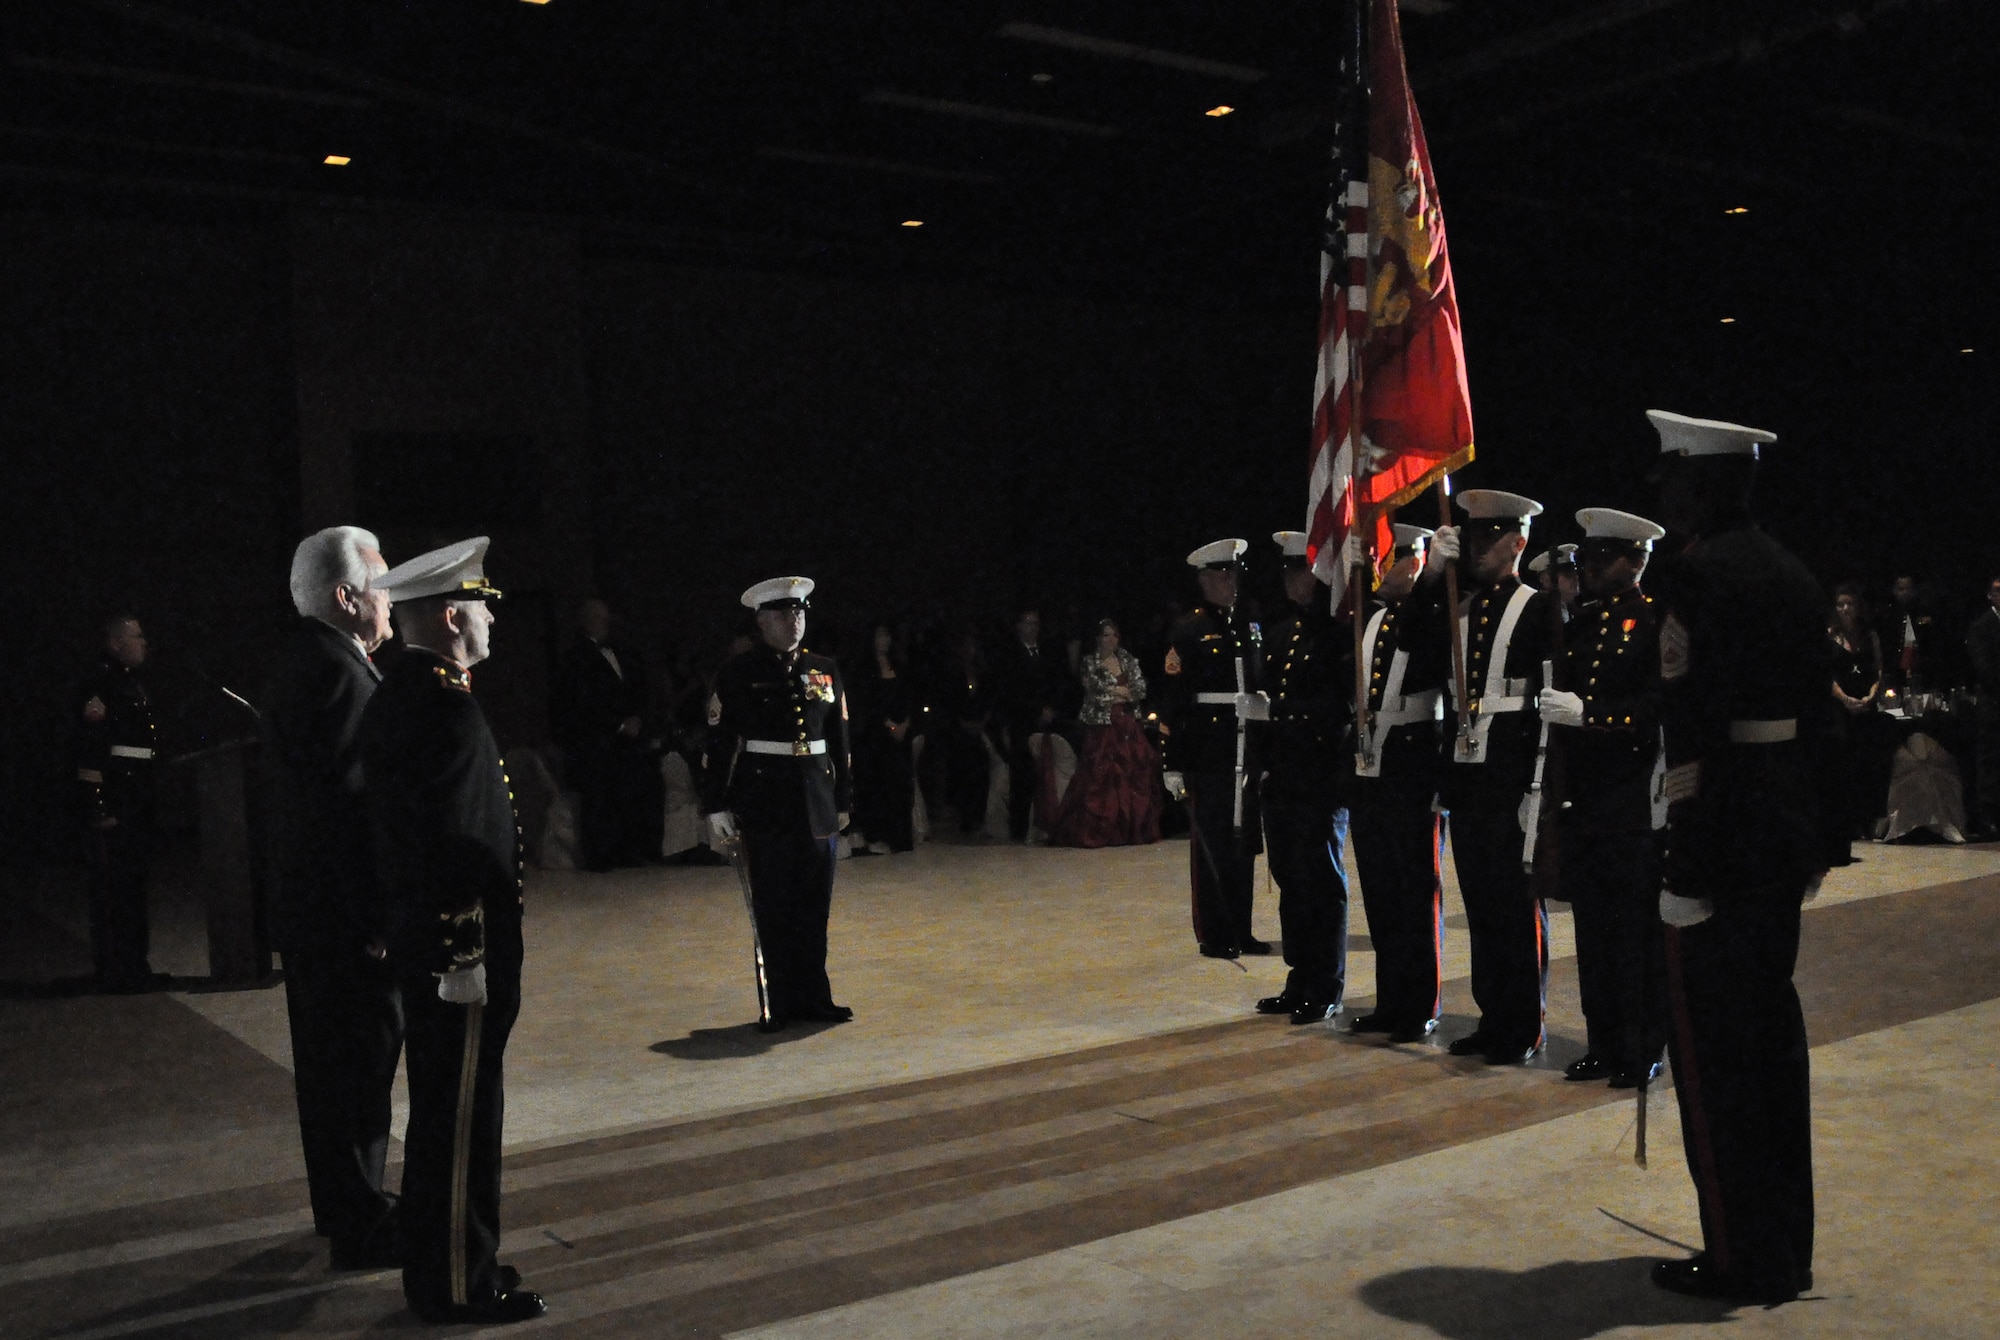 SAN ANGELO, Texas- The color guard presents the colors during the Marine Corps Ball at the McNeese Convention Center Nov. 8. The guest of honor, Mr. Gene Hargraves, Korean War veteran, and Marine Corps Maj. Devin Rullman, Marine Corps Detachment Commanding Officer, opened the ceremony with remarks on Marine history and heritage. (U.S. Air Force photo/ Airman 1st Class Erica Rodriguez)